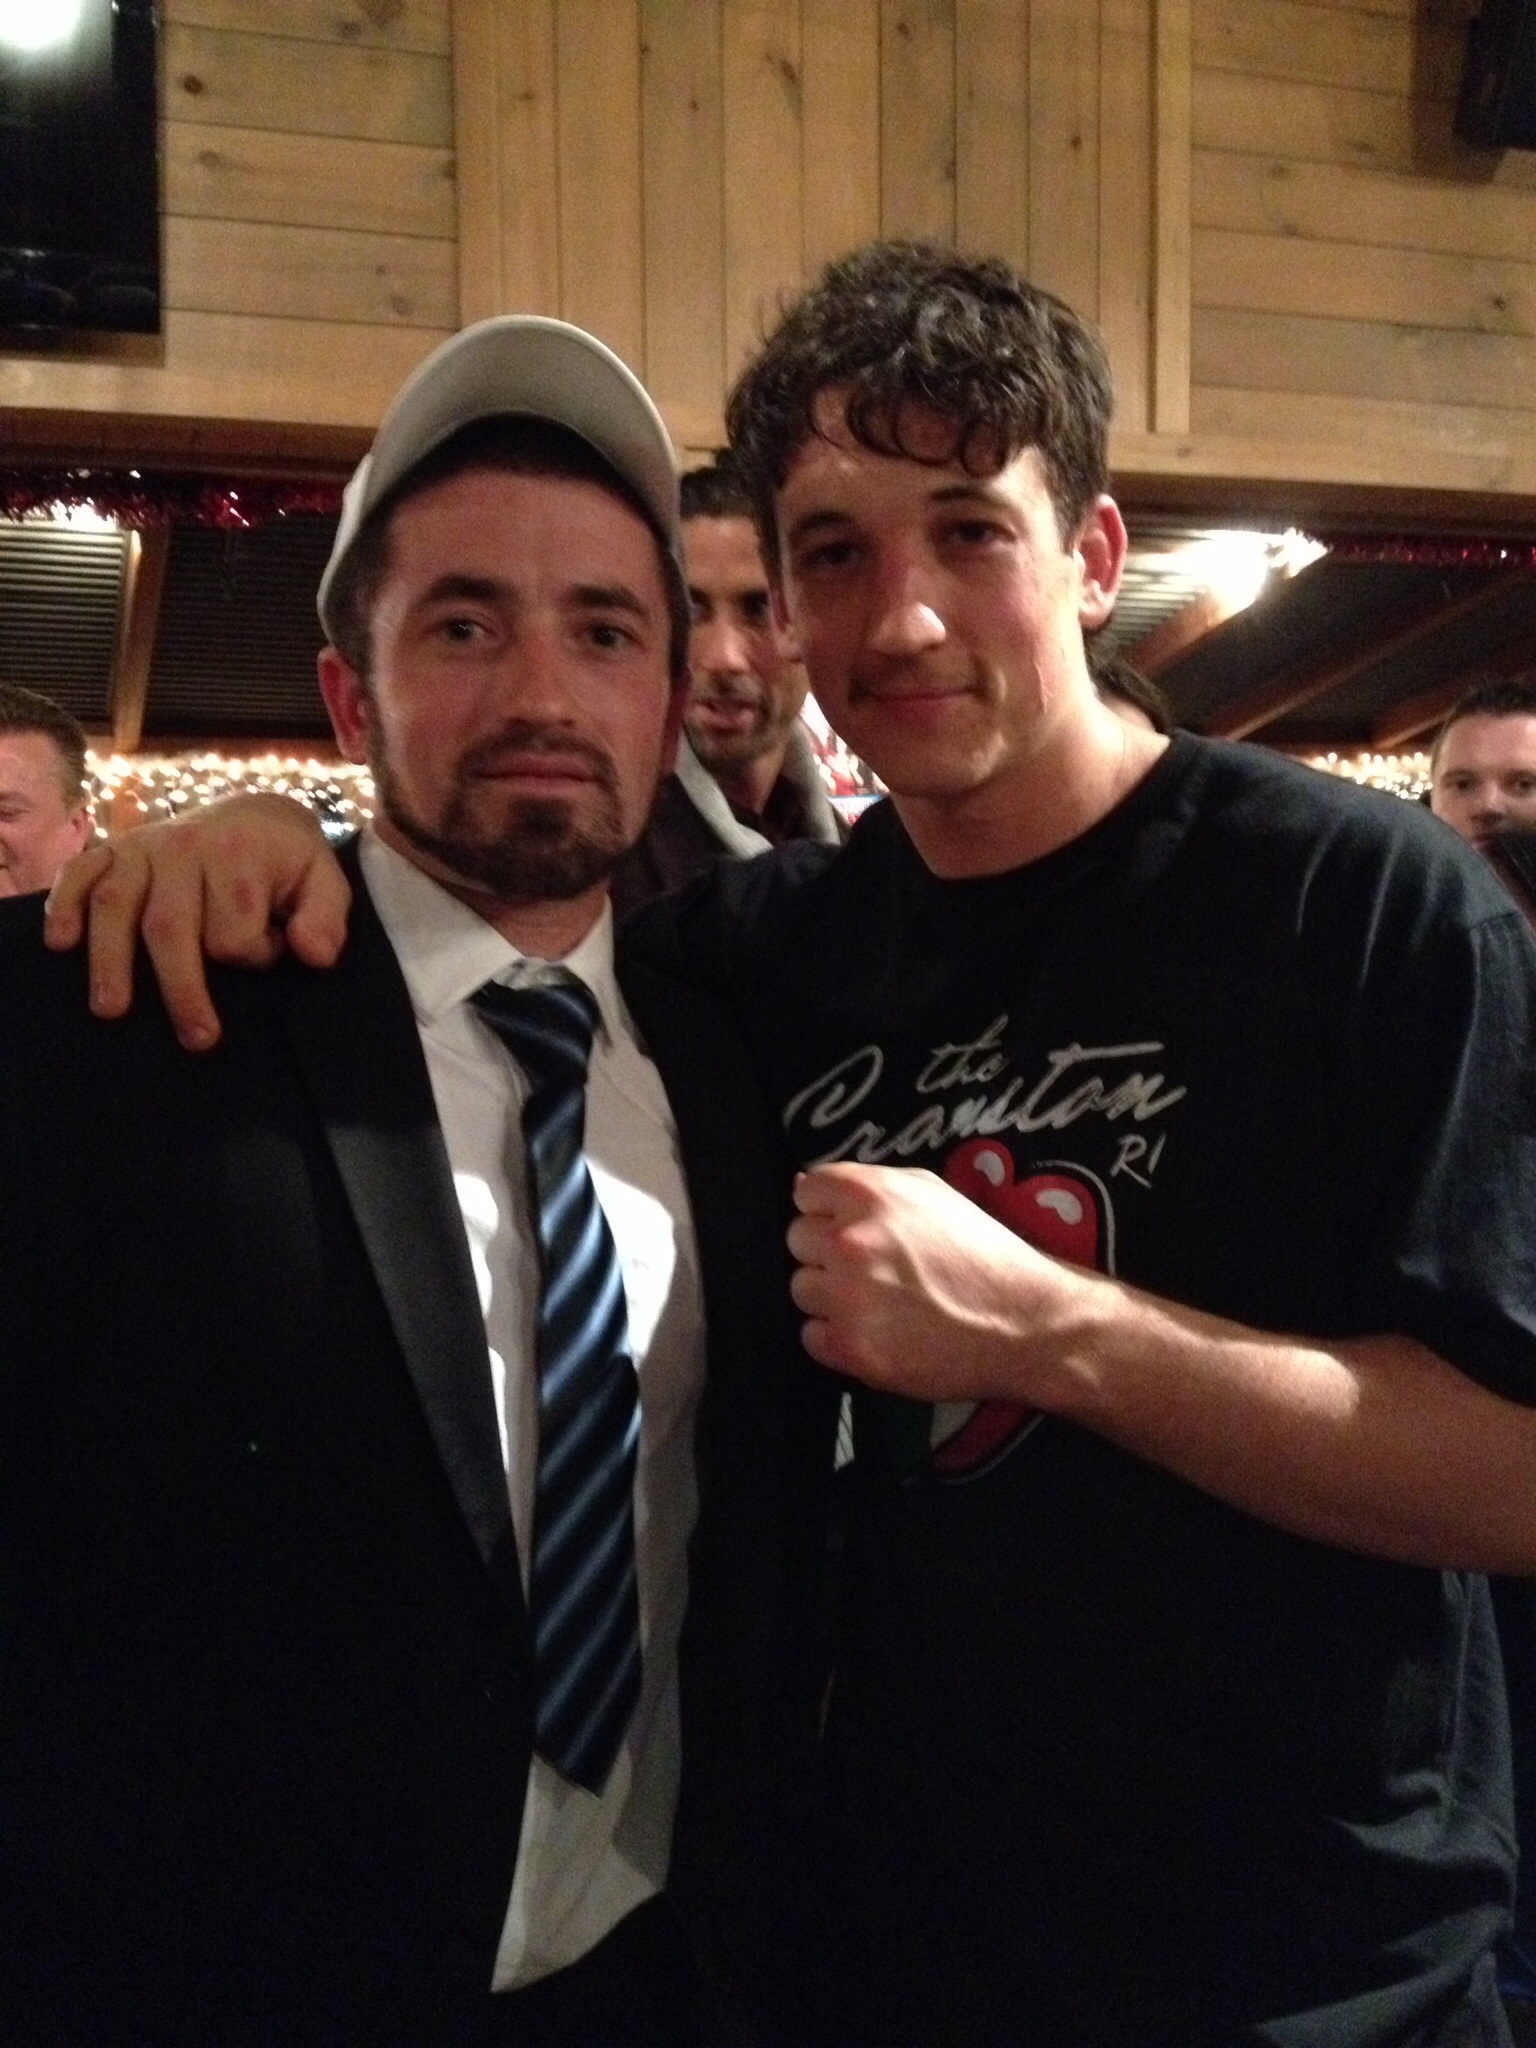 Miles Tellers and I at the after party for Bleed For This